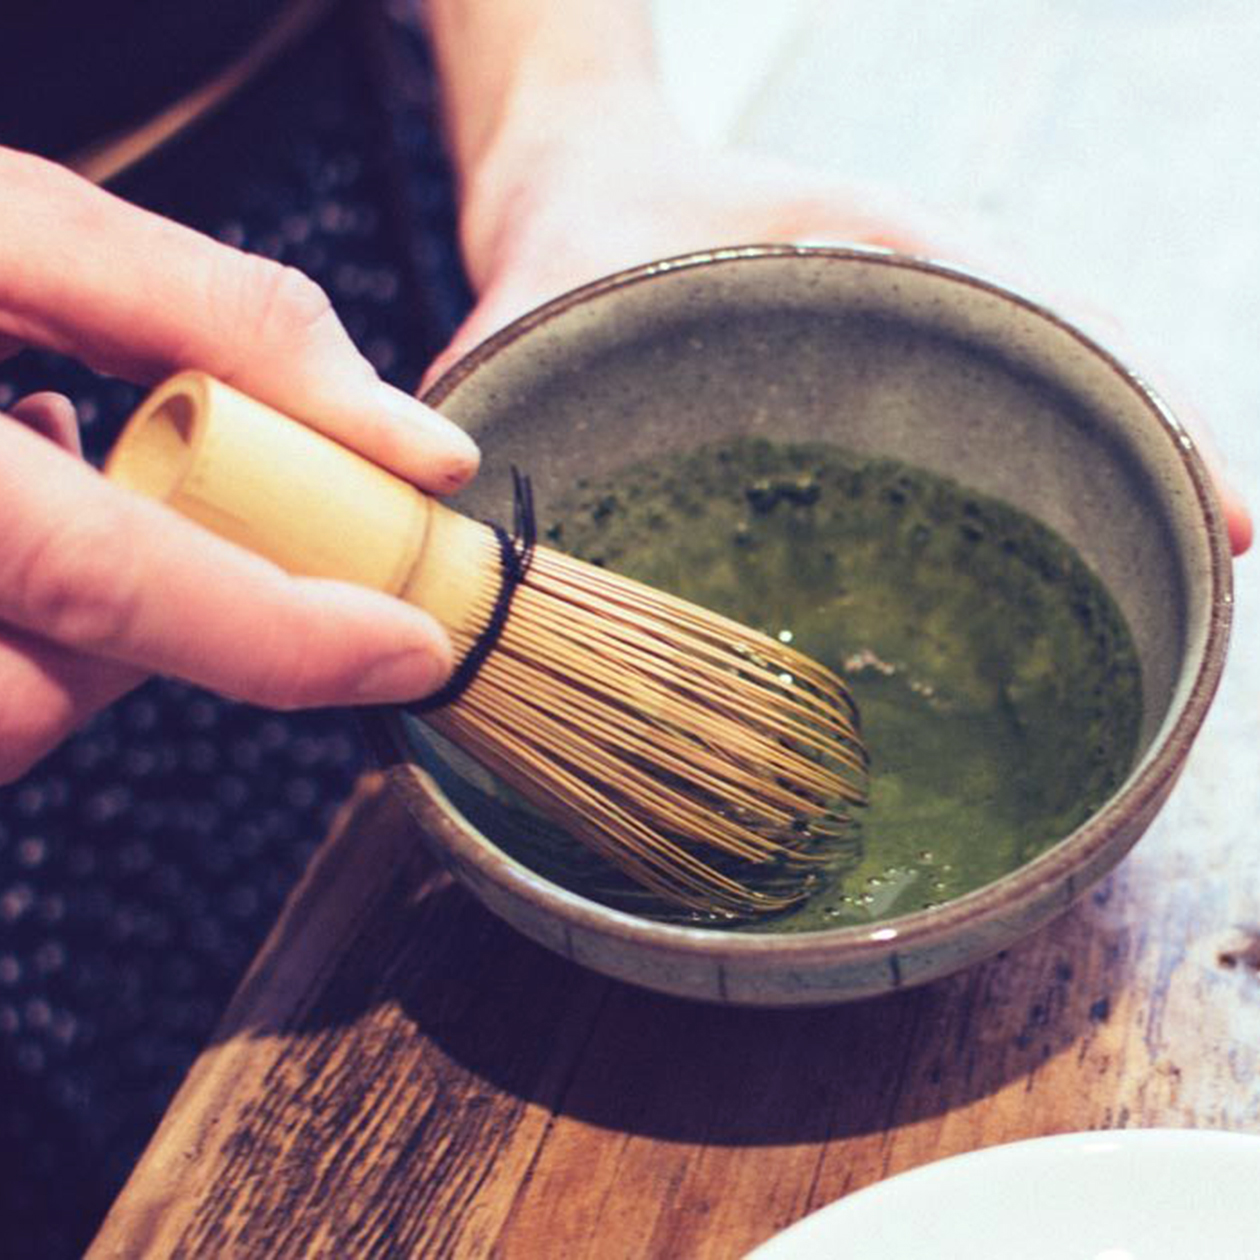 3 Amazing Vegan Recipes with a Matcha Touch